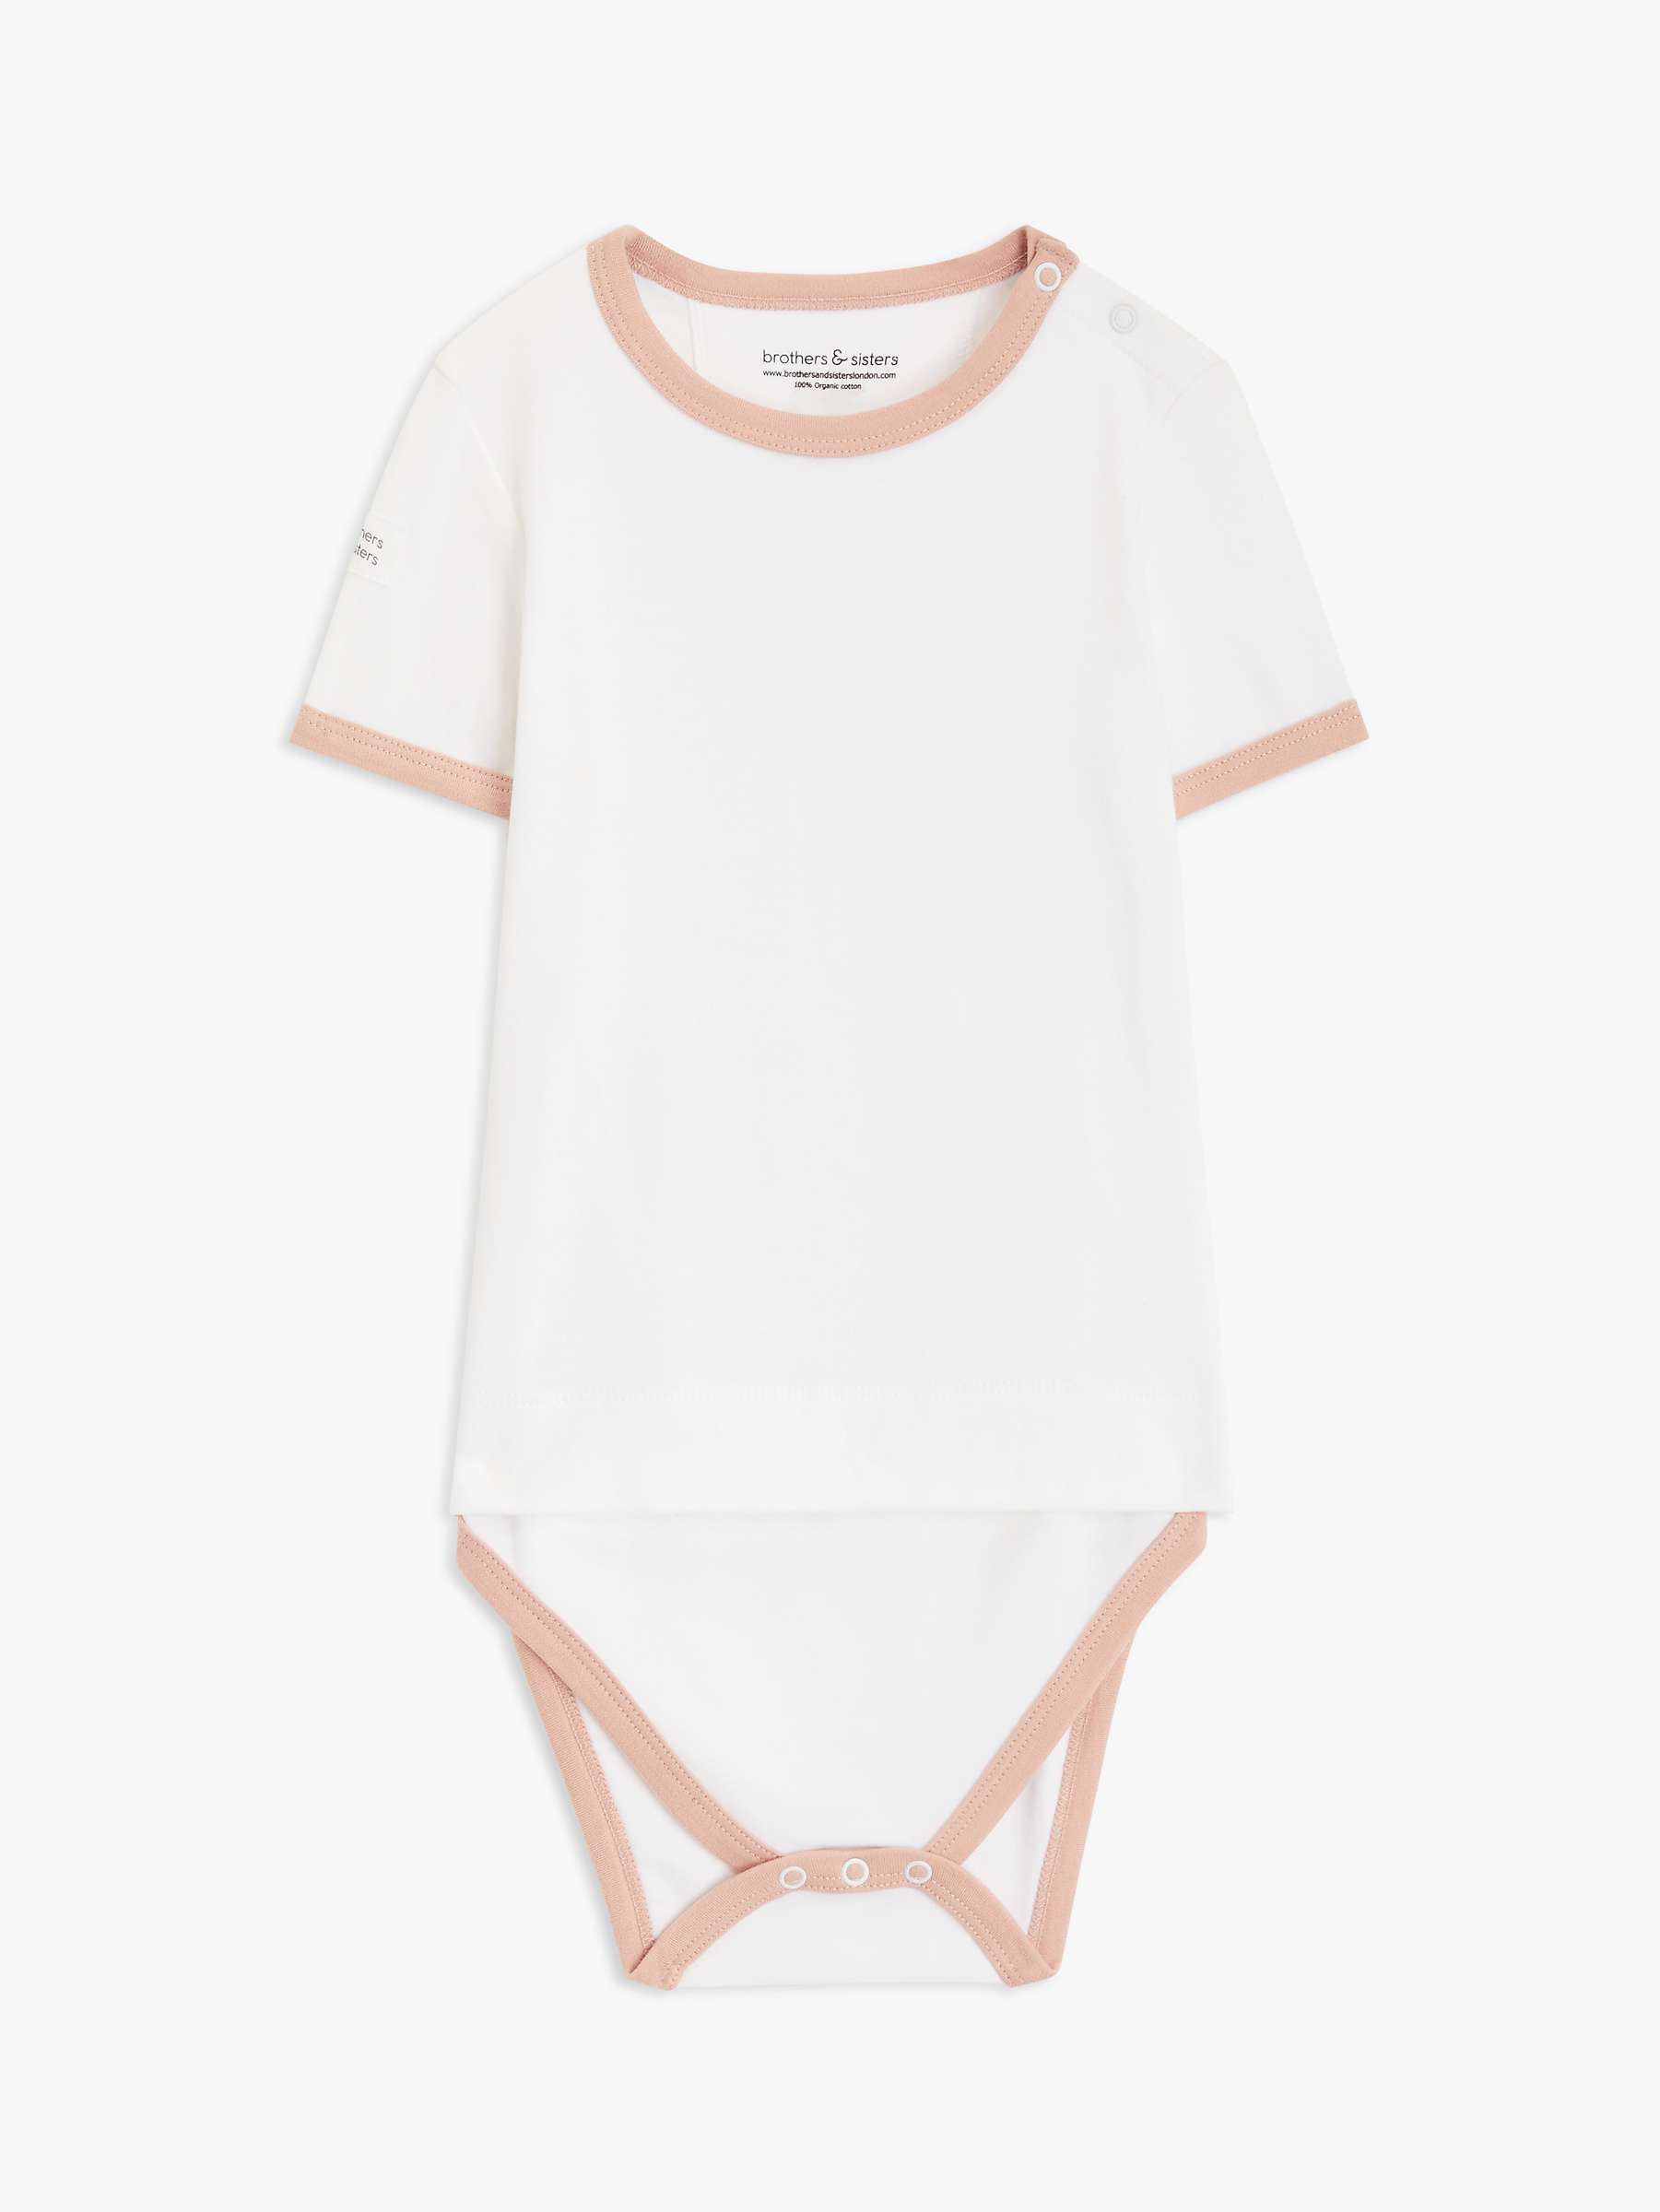 Buy Brothers & Sisters Kids' Organic Cotton Unisex Tee, White/Pink Online at johnlewis.com